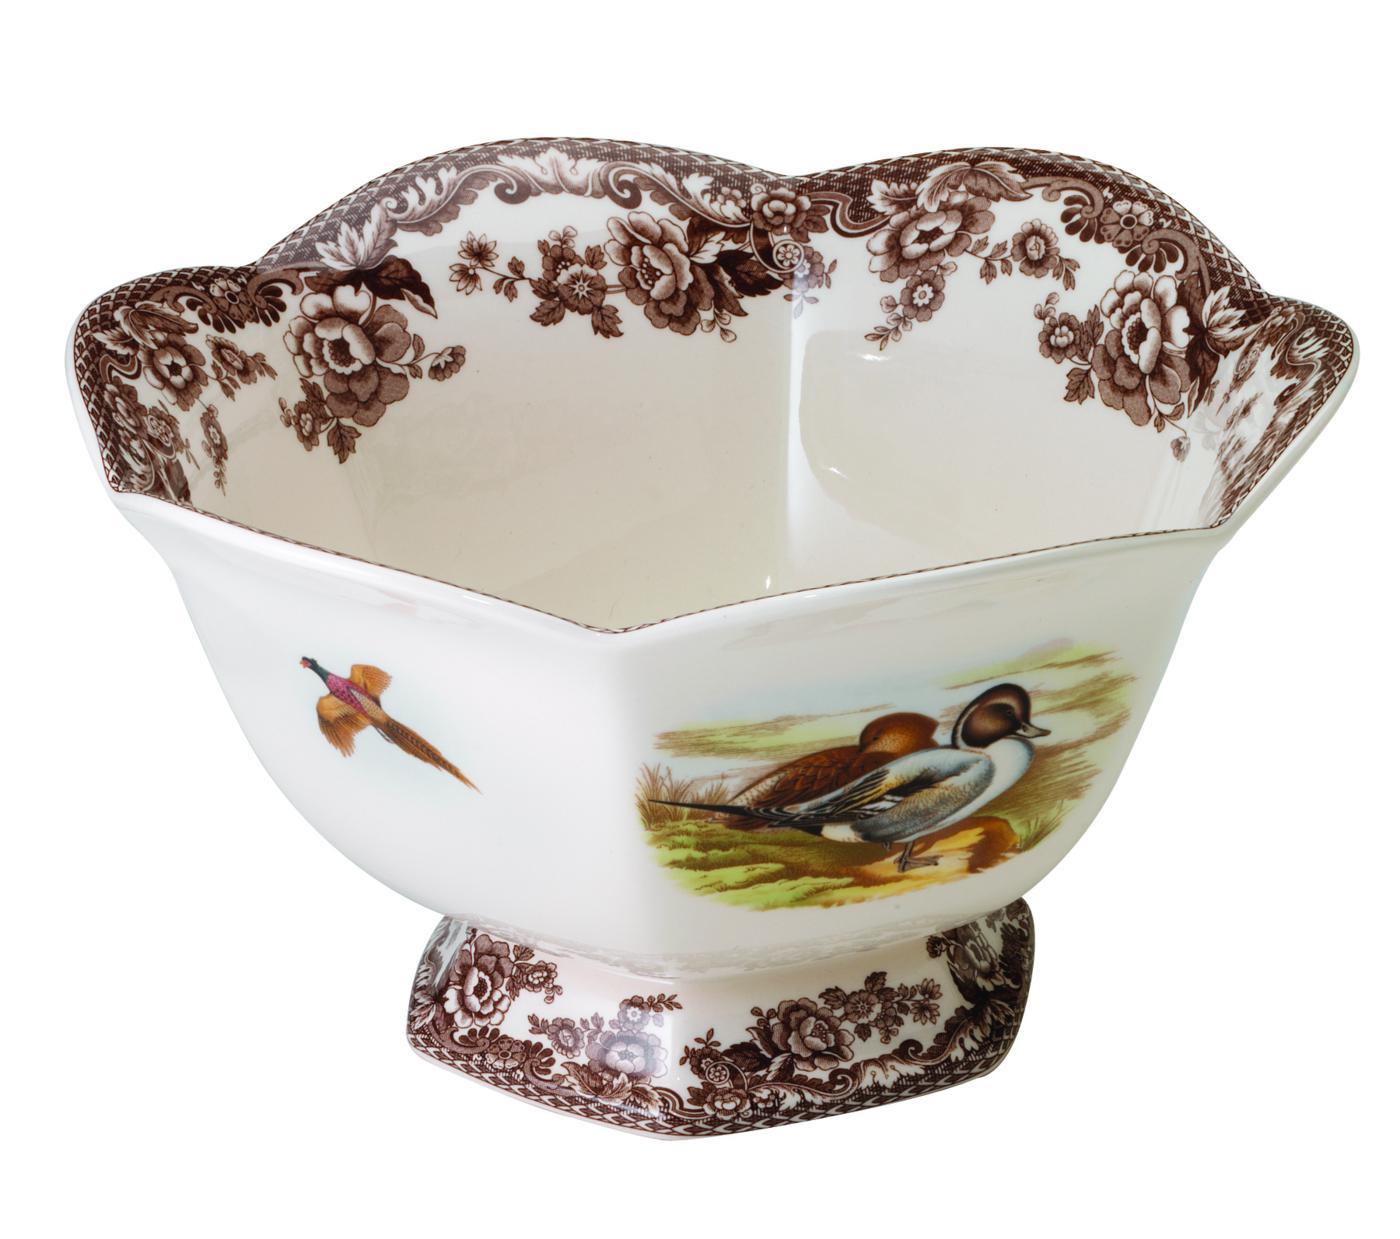 Spode Woodland Hexagonal Footed Bowl, Lapwing/Pintail